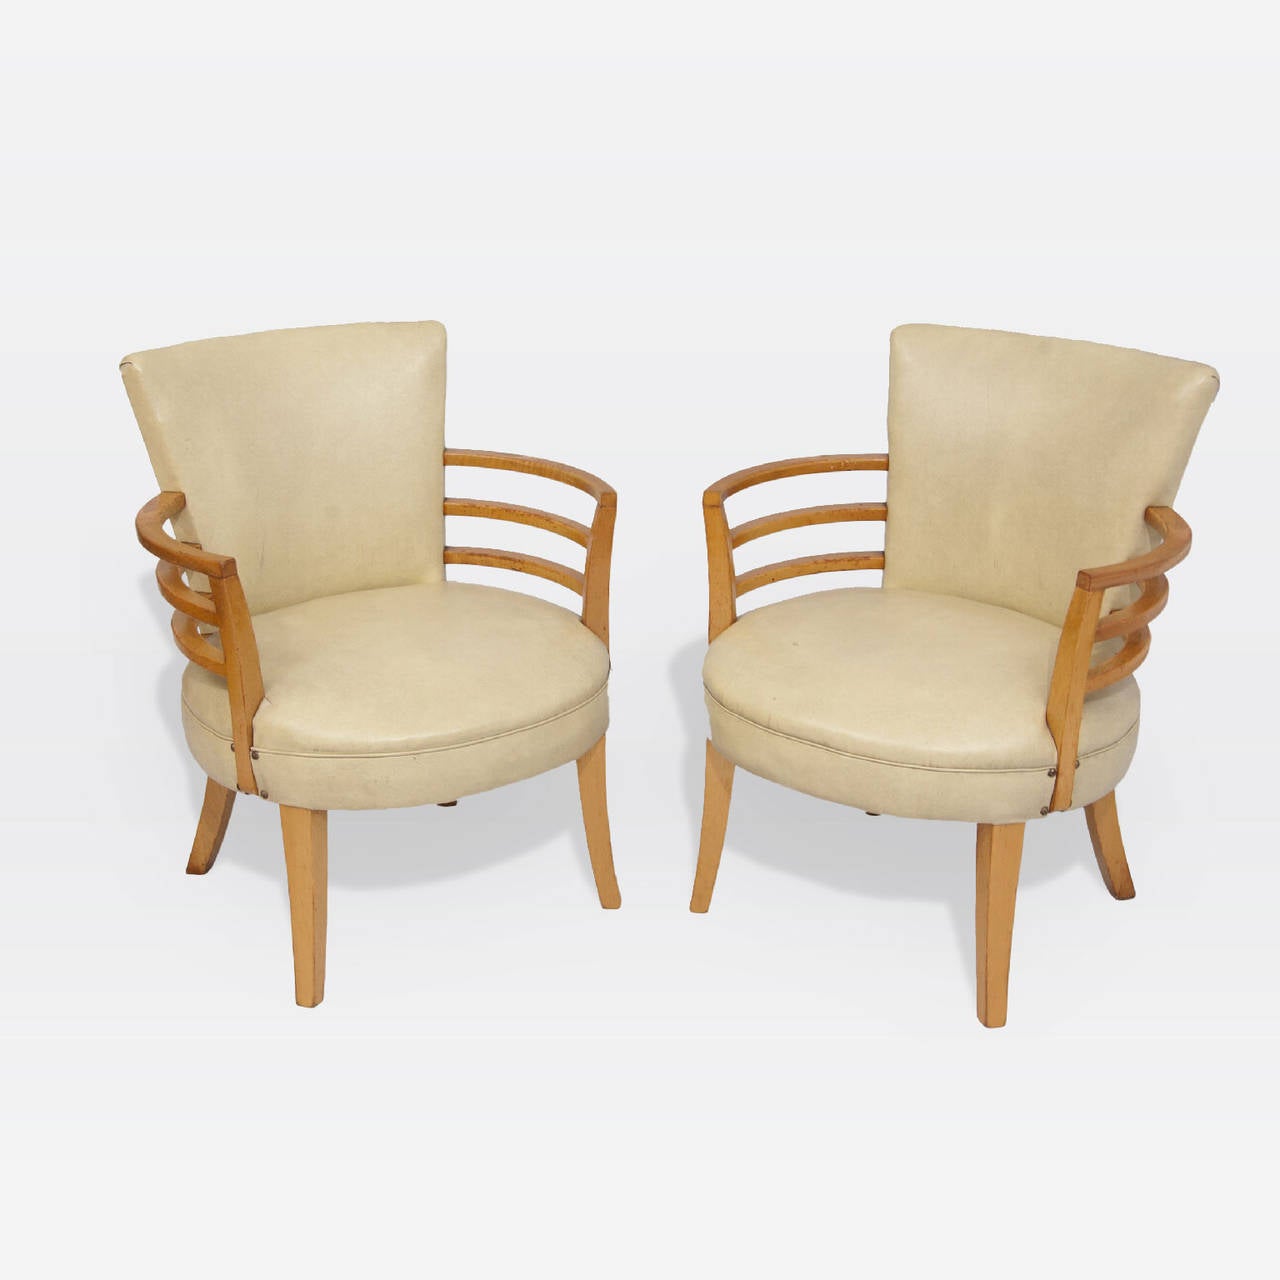 Curved seat backs and round seats in buff vinyl. Blonde wood curved arms and tapered legs.